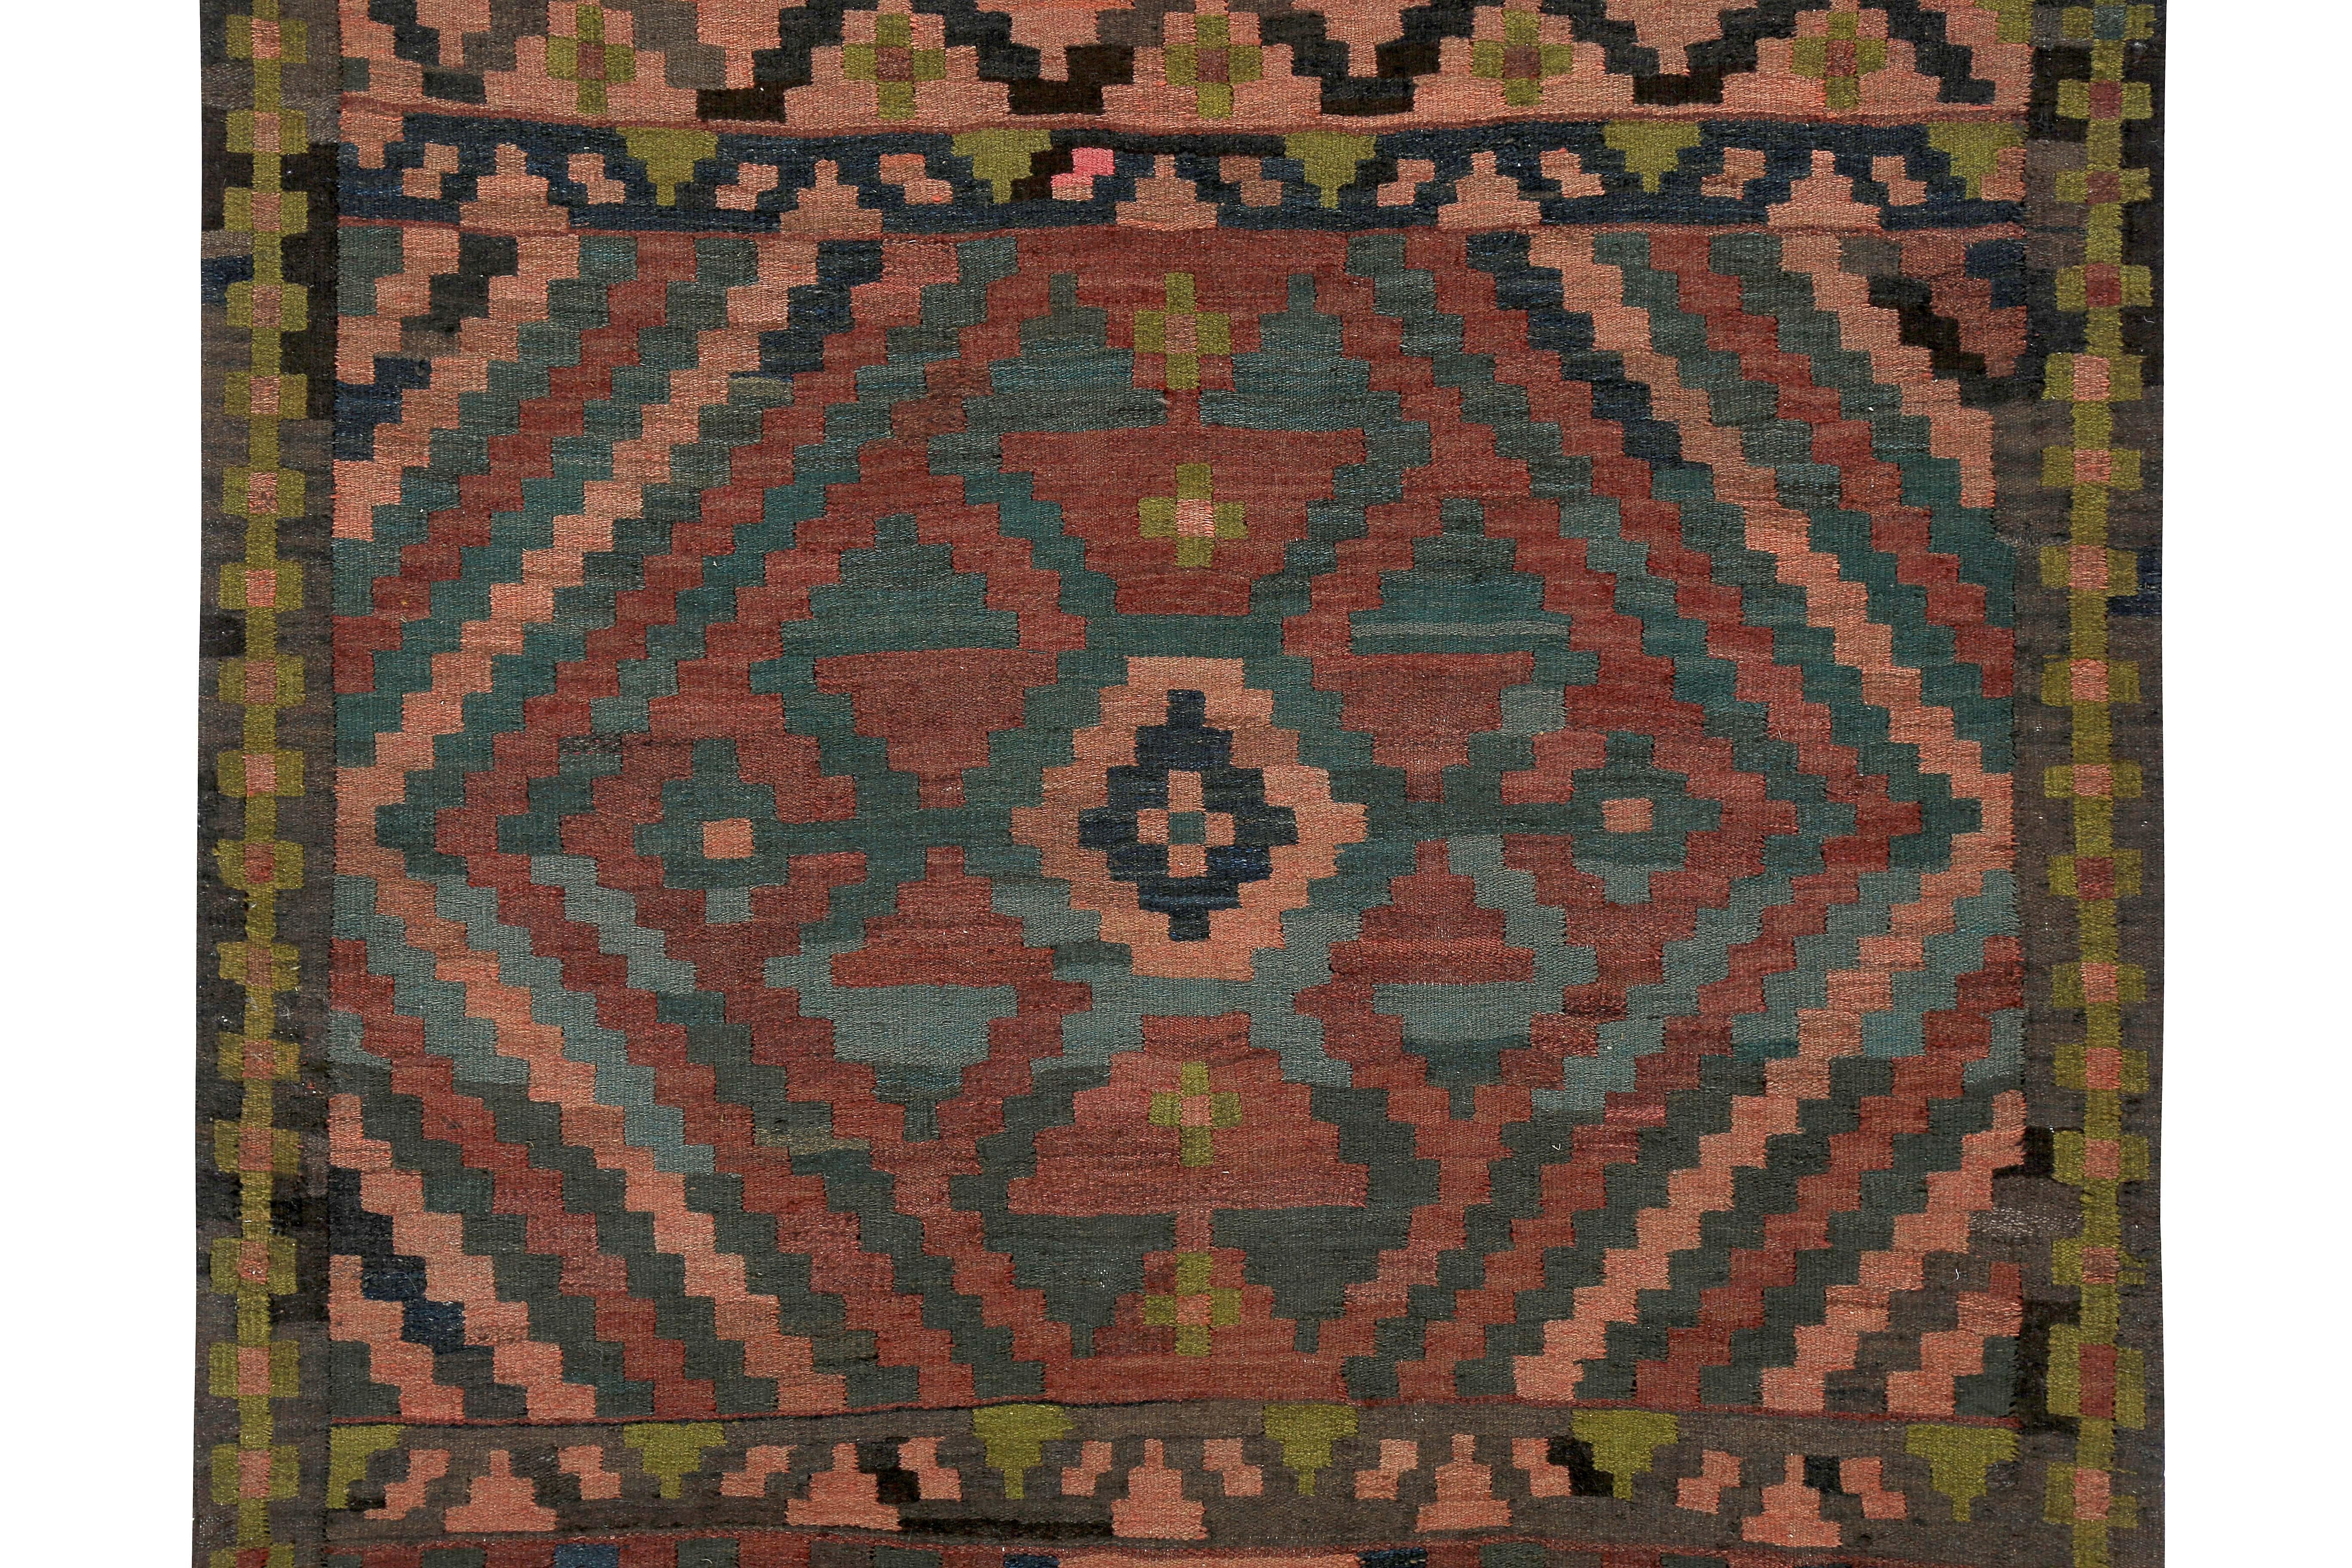 Hand-Woven Turkish Kilim Runner Rug with Pink and Green Tribal Details on Brown Field For Sale